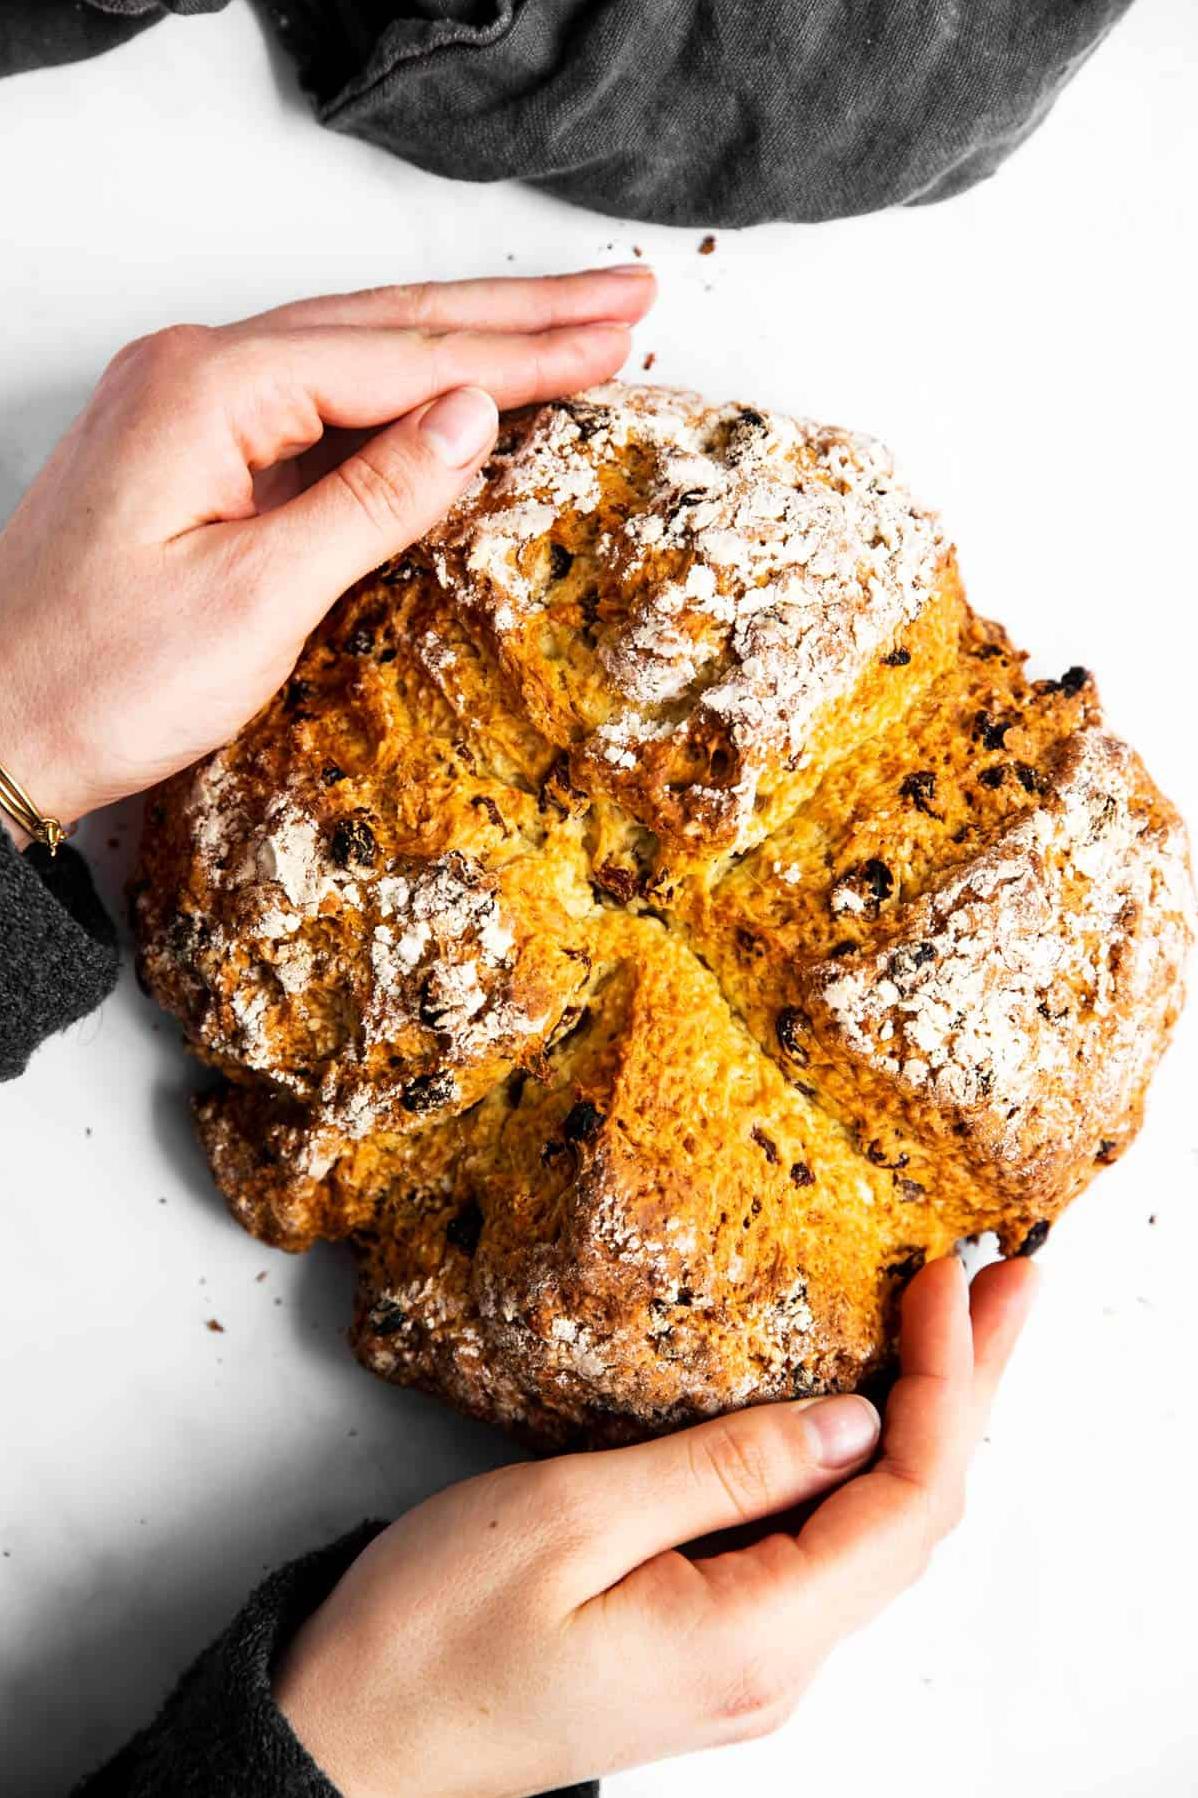  Add some butter and homemade jam to a slice of warm Irish Soda Bread for a perfect breakfast or tea-time snack.